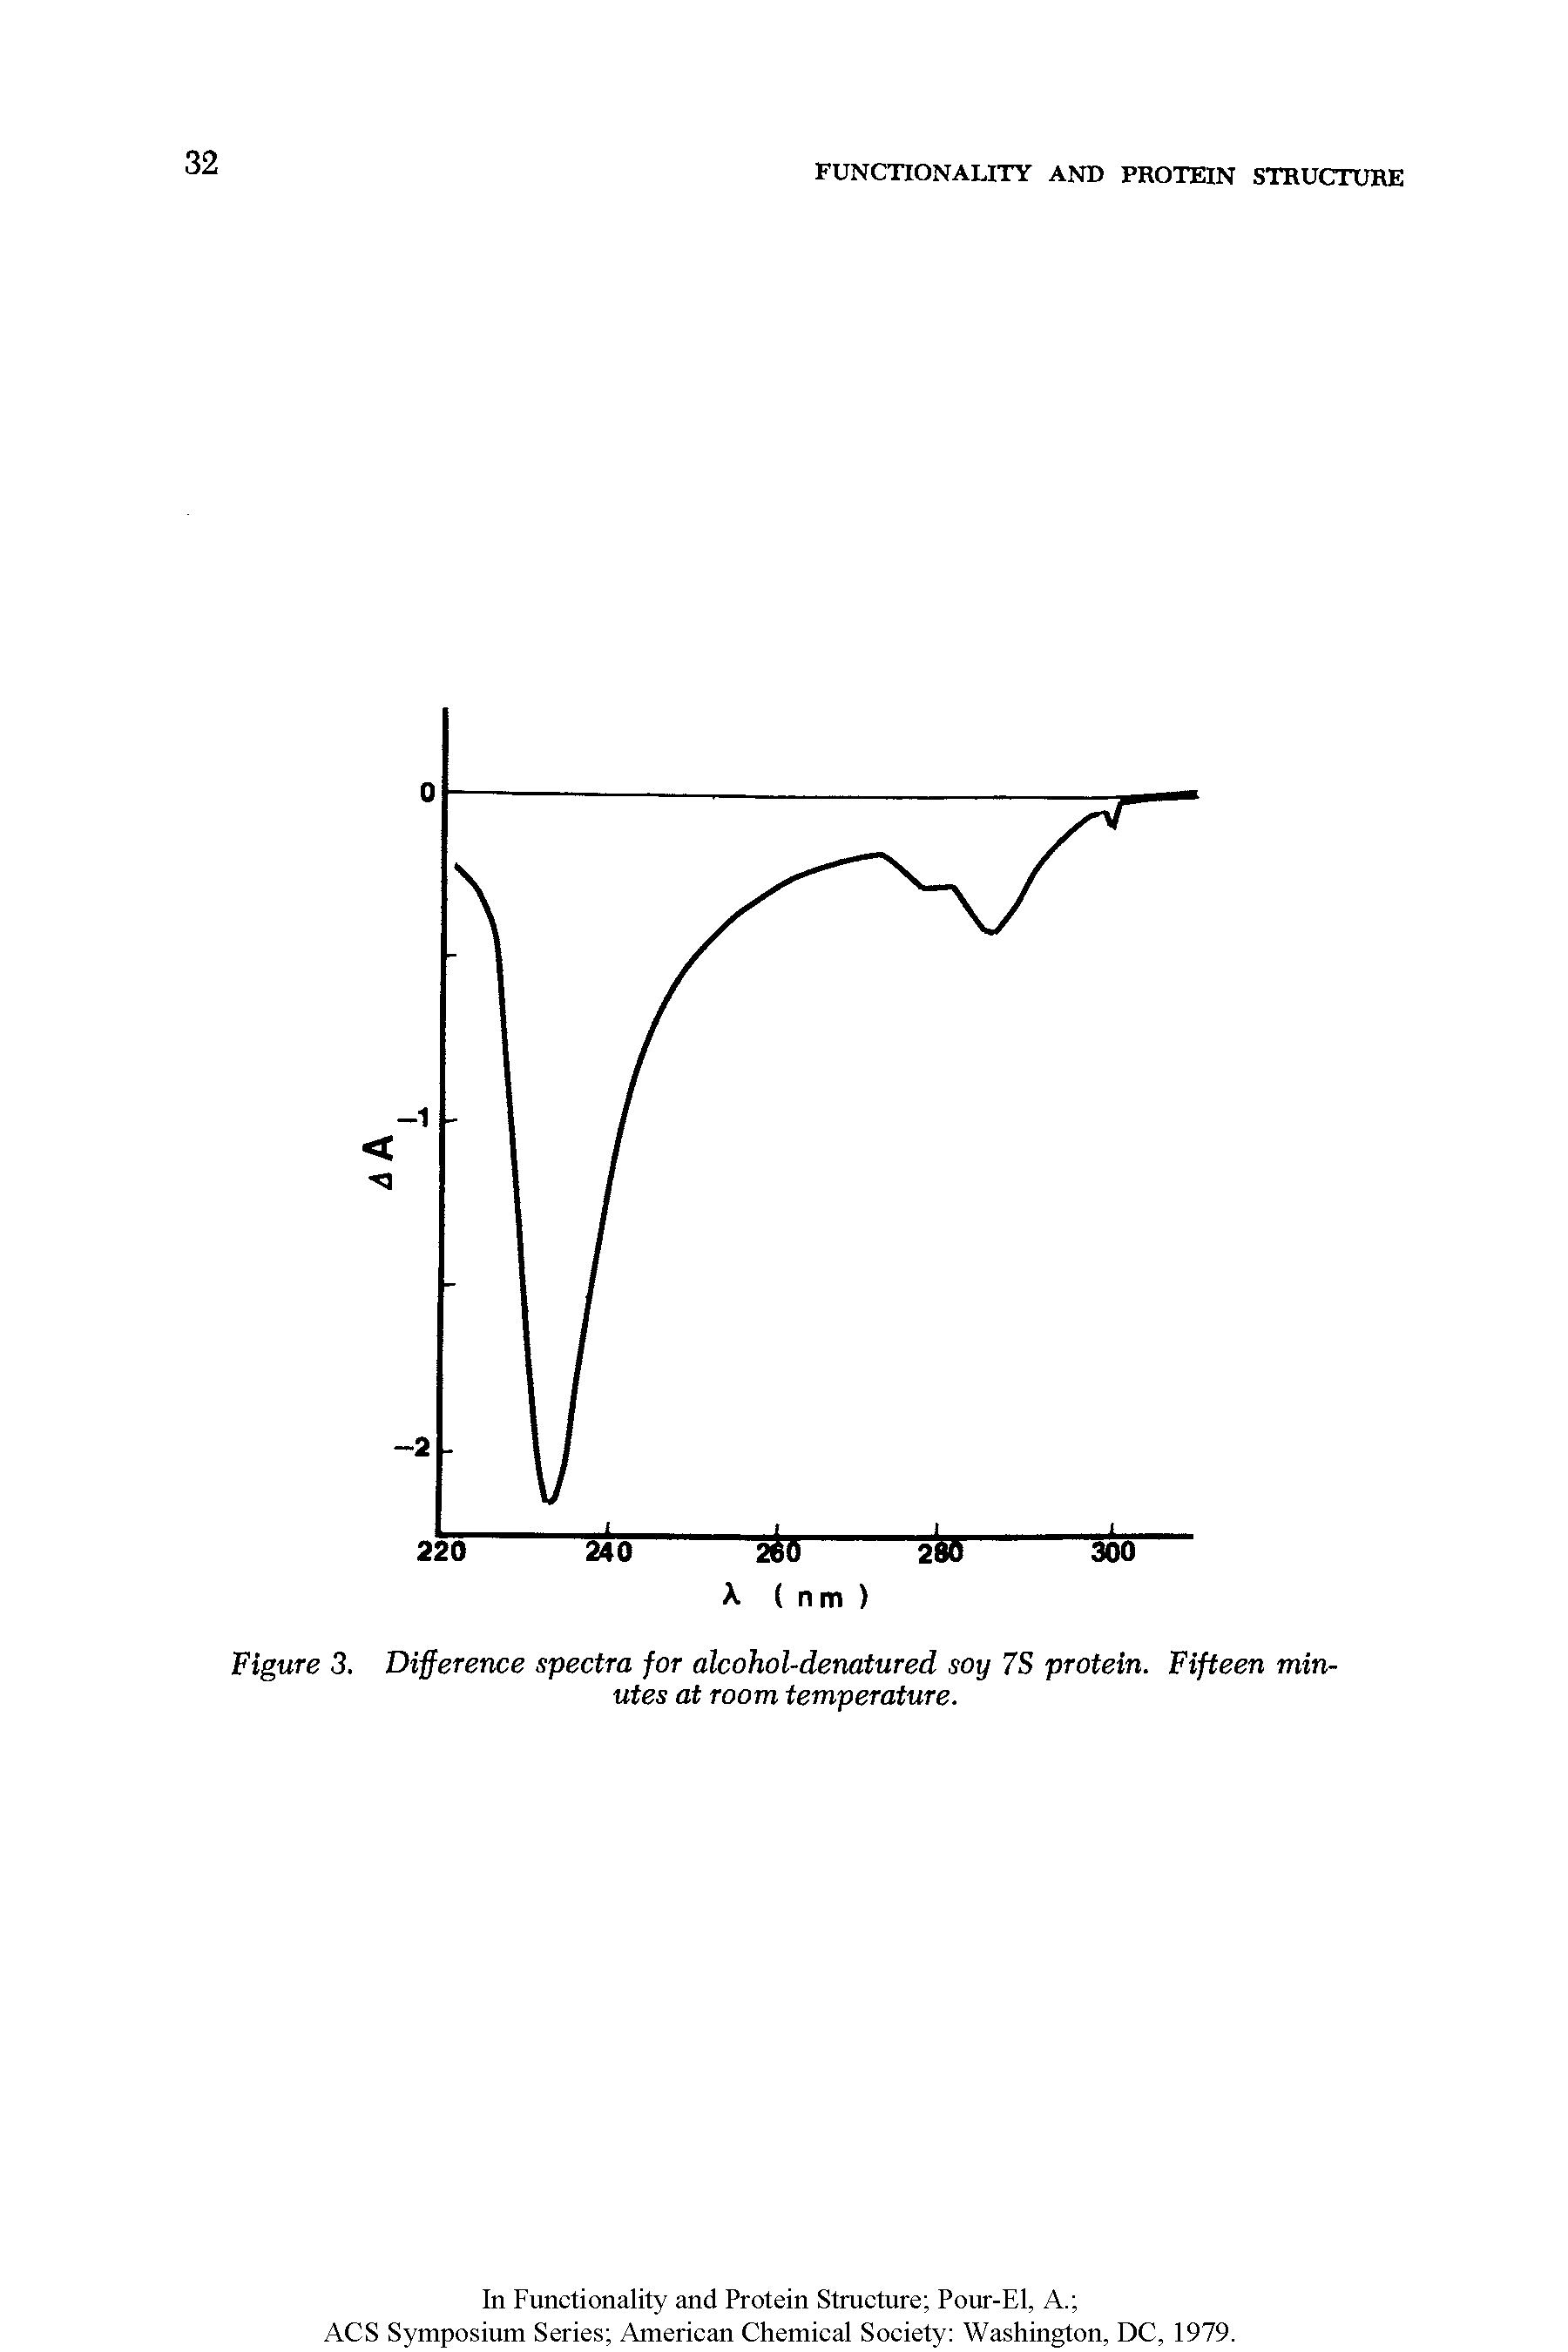 Figure 3. Difference spectra for alcohol-denatured soy 7S protein. Fifteen minutes at room temperature.